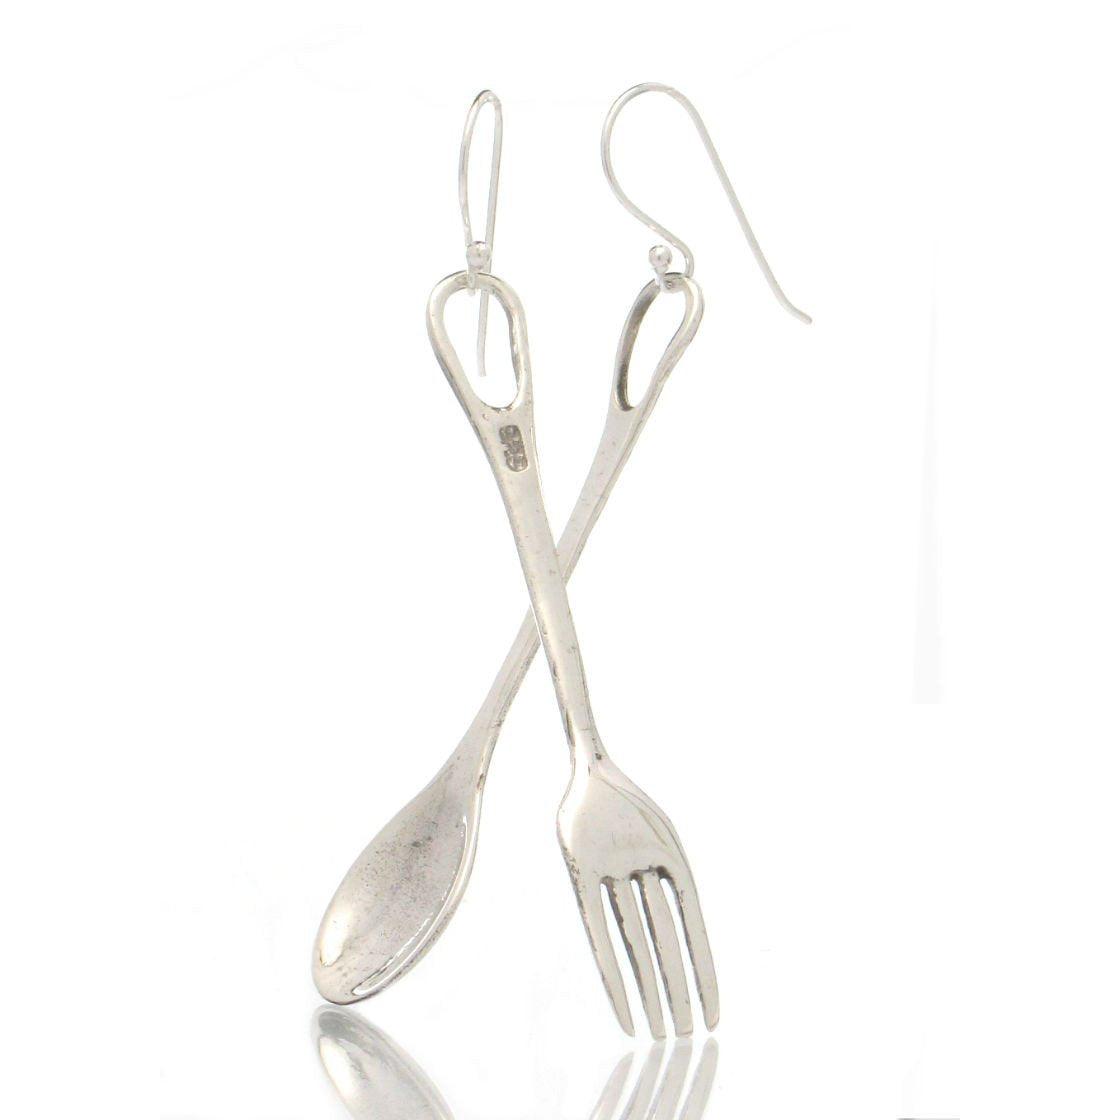 Sterling Silver Fork and Spoon Earrings – Beads of Paradise